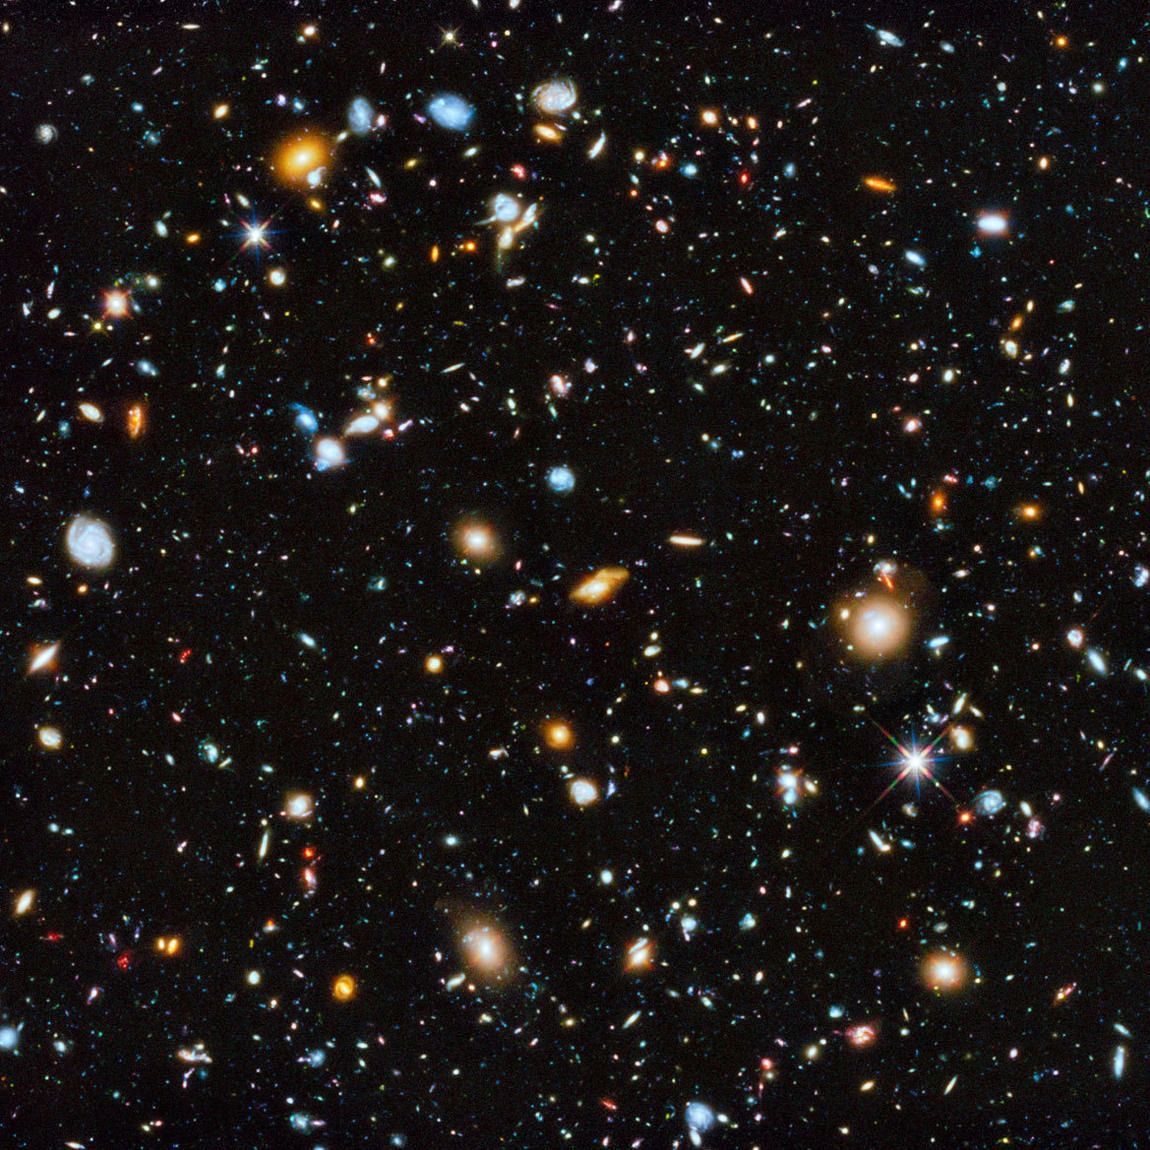 10,000 galaxies as photographed by Hubble Space Telescope (2014).